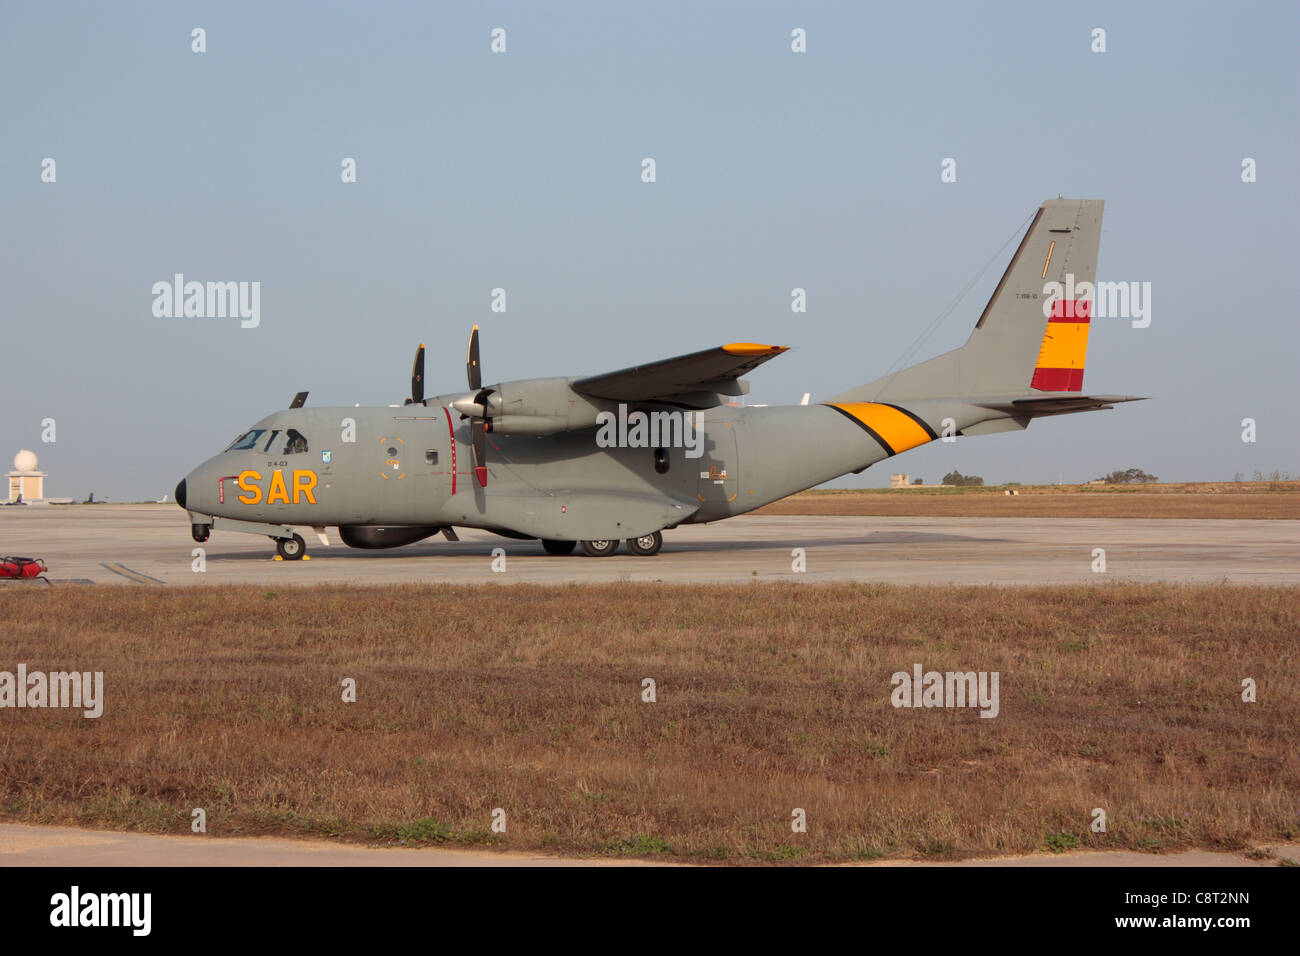 Spanish Air Force CASA CN-235 search and rescue (SAR) aircraft Stock Photo